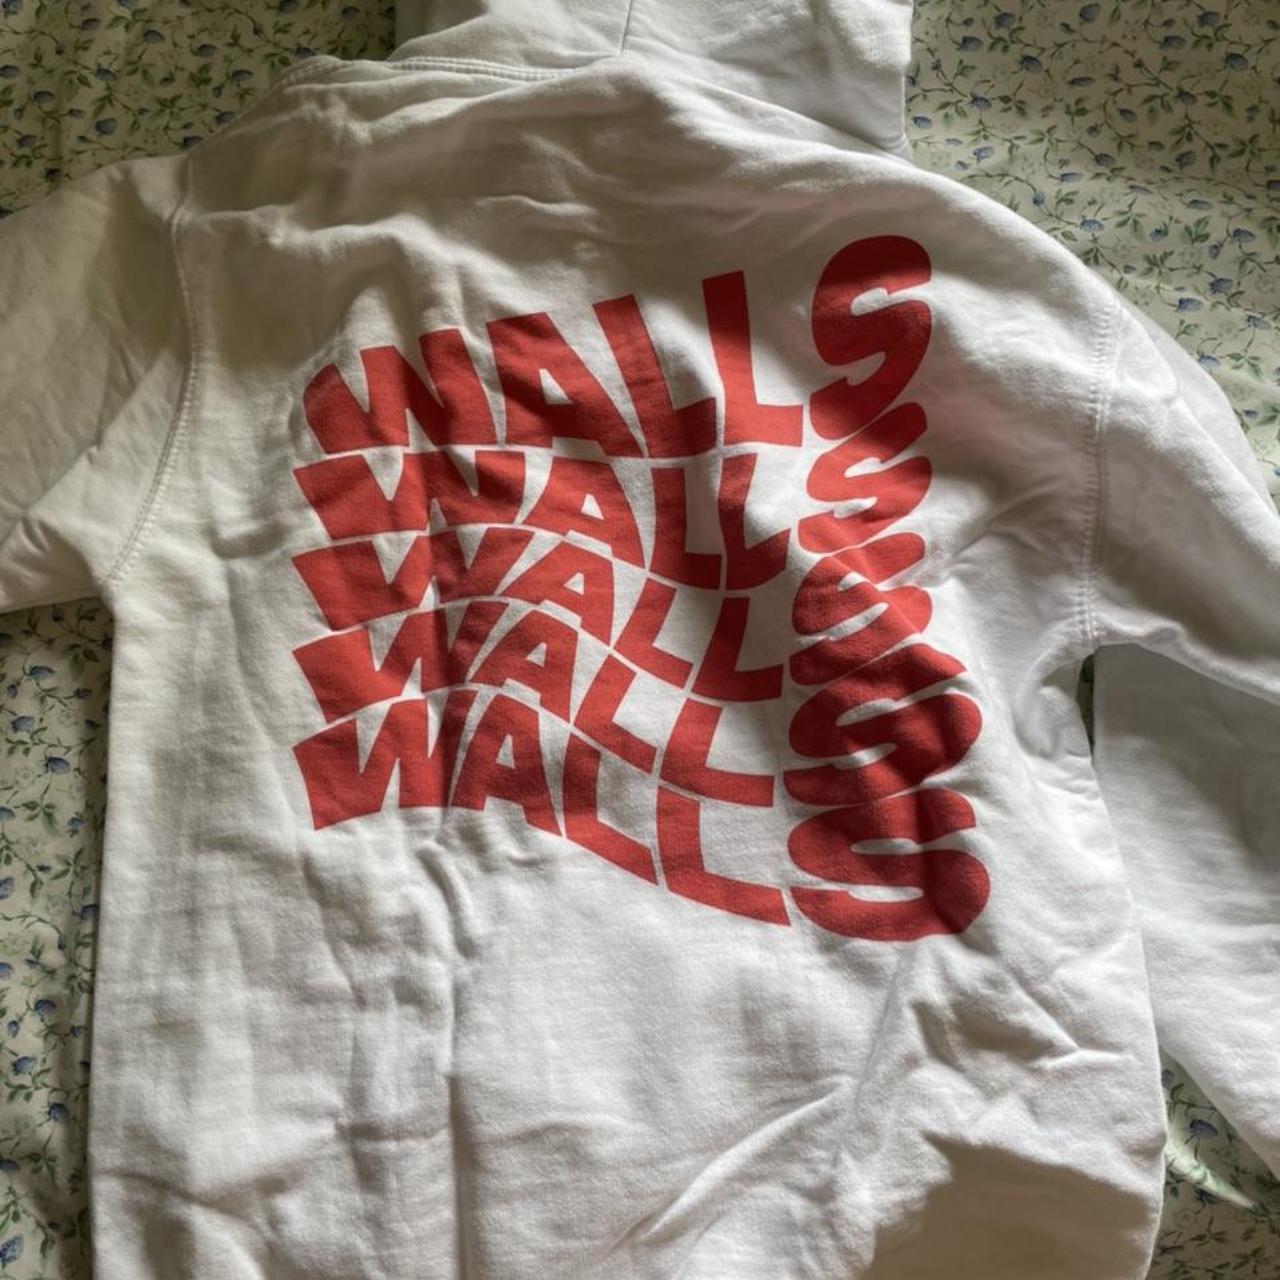 Louis Tomlinson Walls limited edition red - Depop